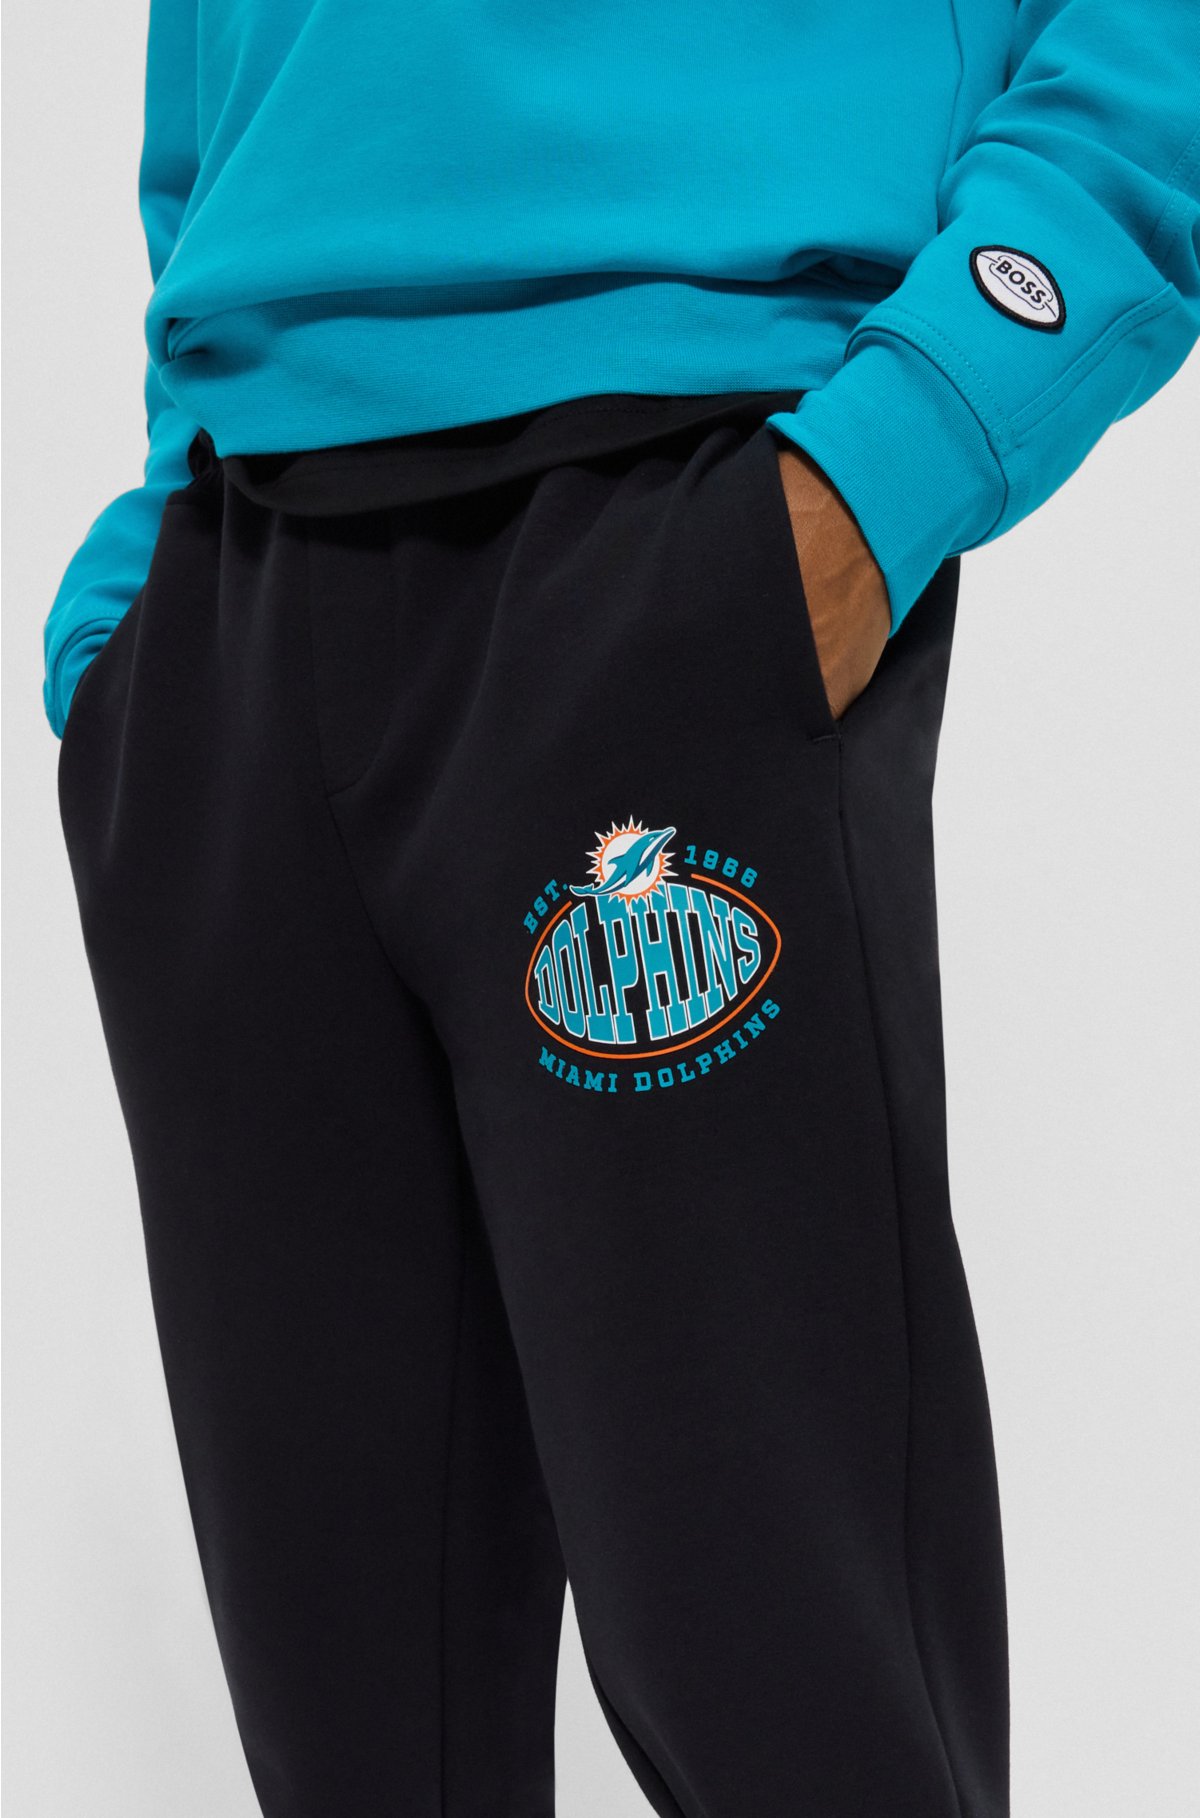 BOSS x NFL cotton-blend tracksuit bottoms with collaborative branding, Dolphins